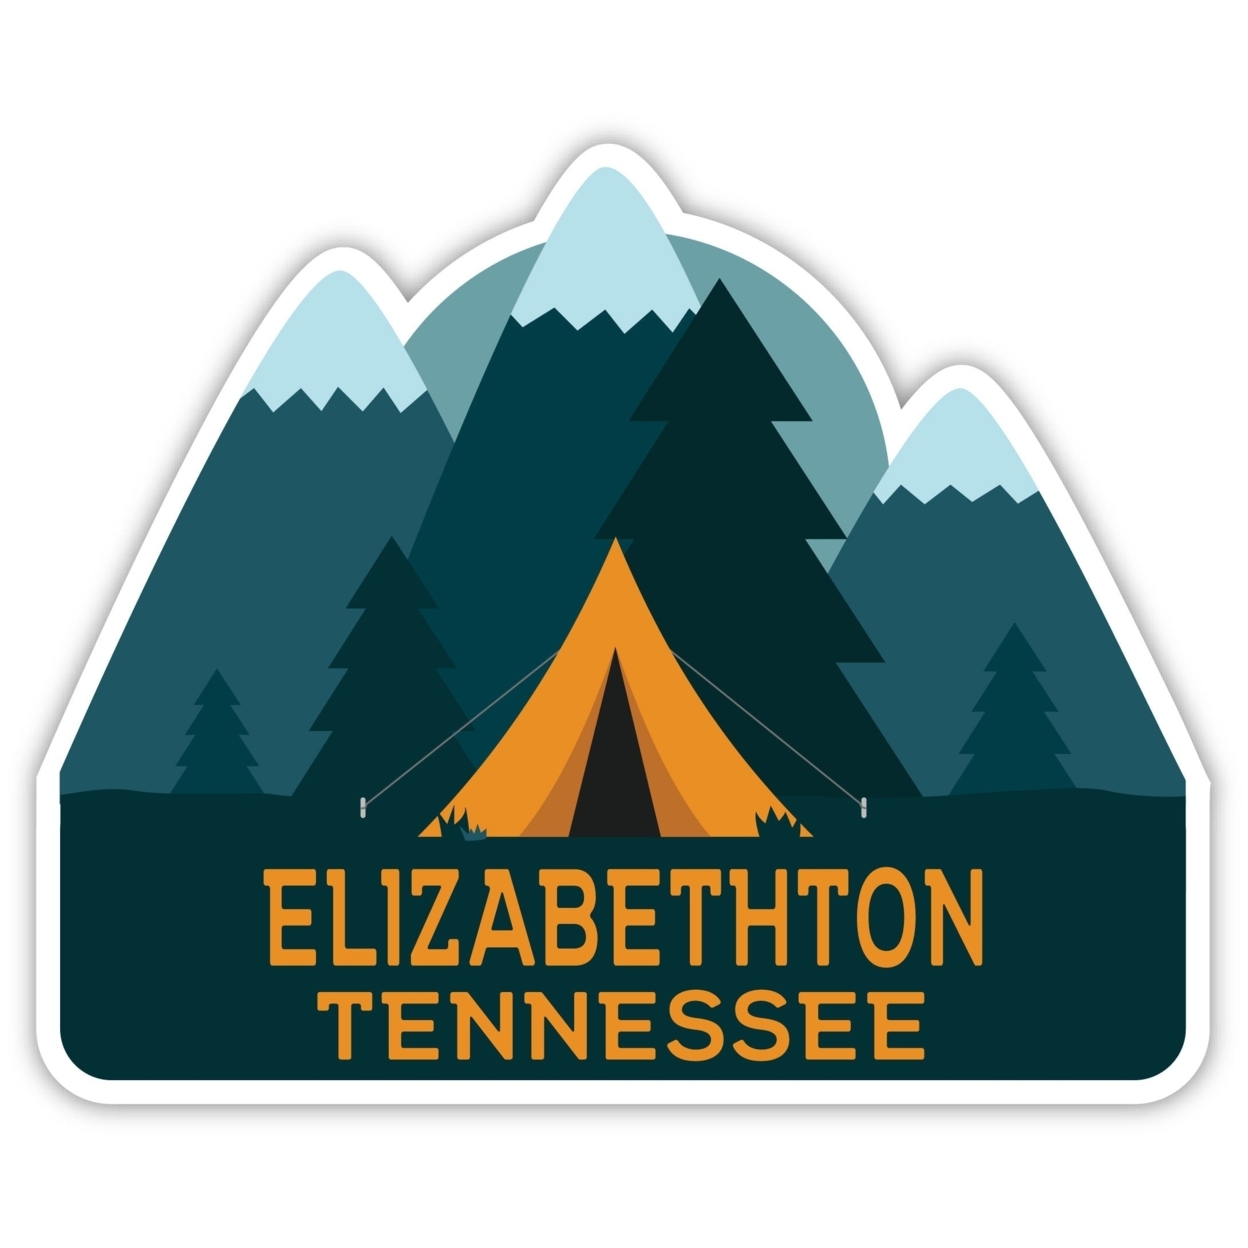 Elizabethton Tennessee Souvenir Decorative Stickers (Choose Theme And Size) - 4-Pack, 8-Inch, Tent